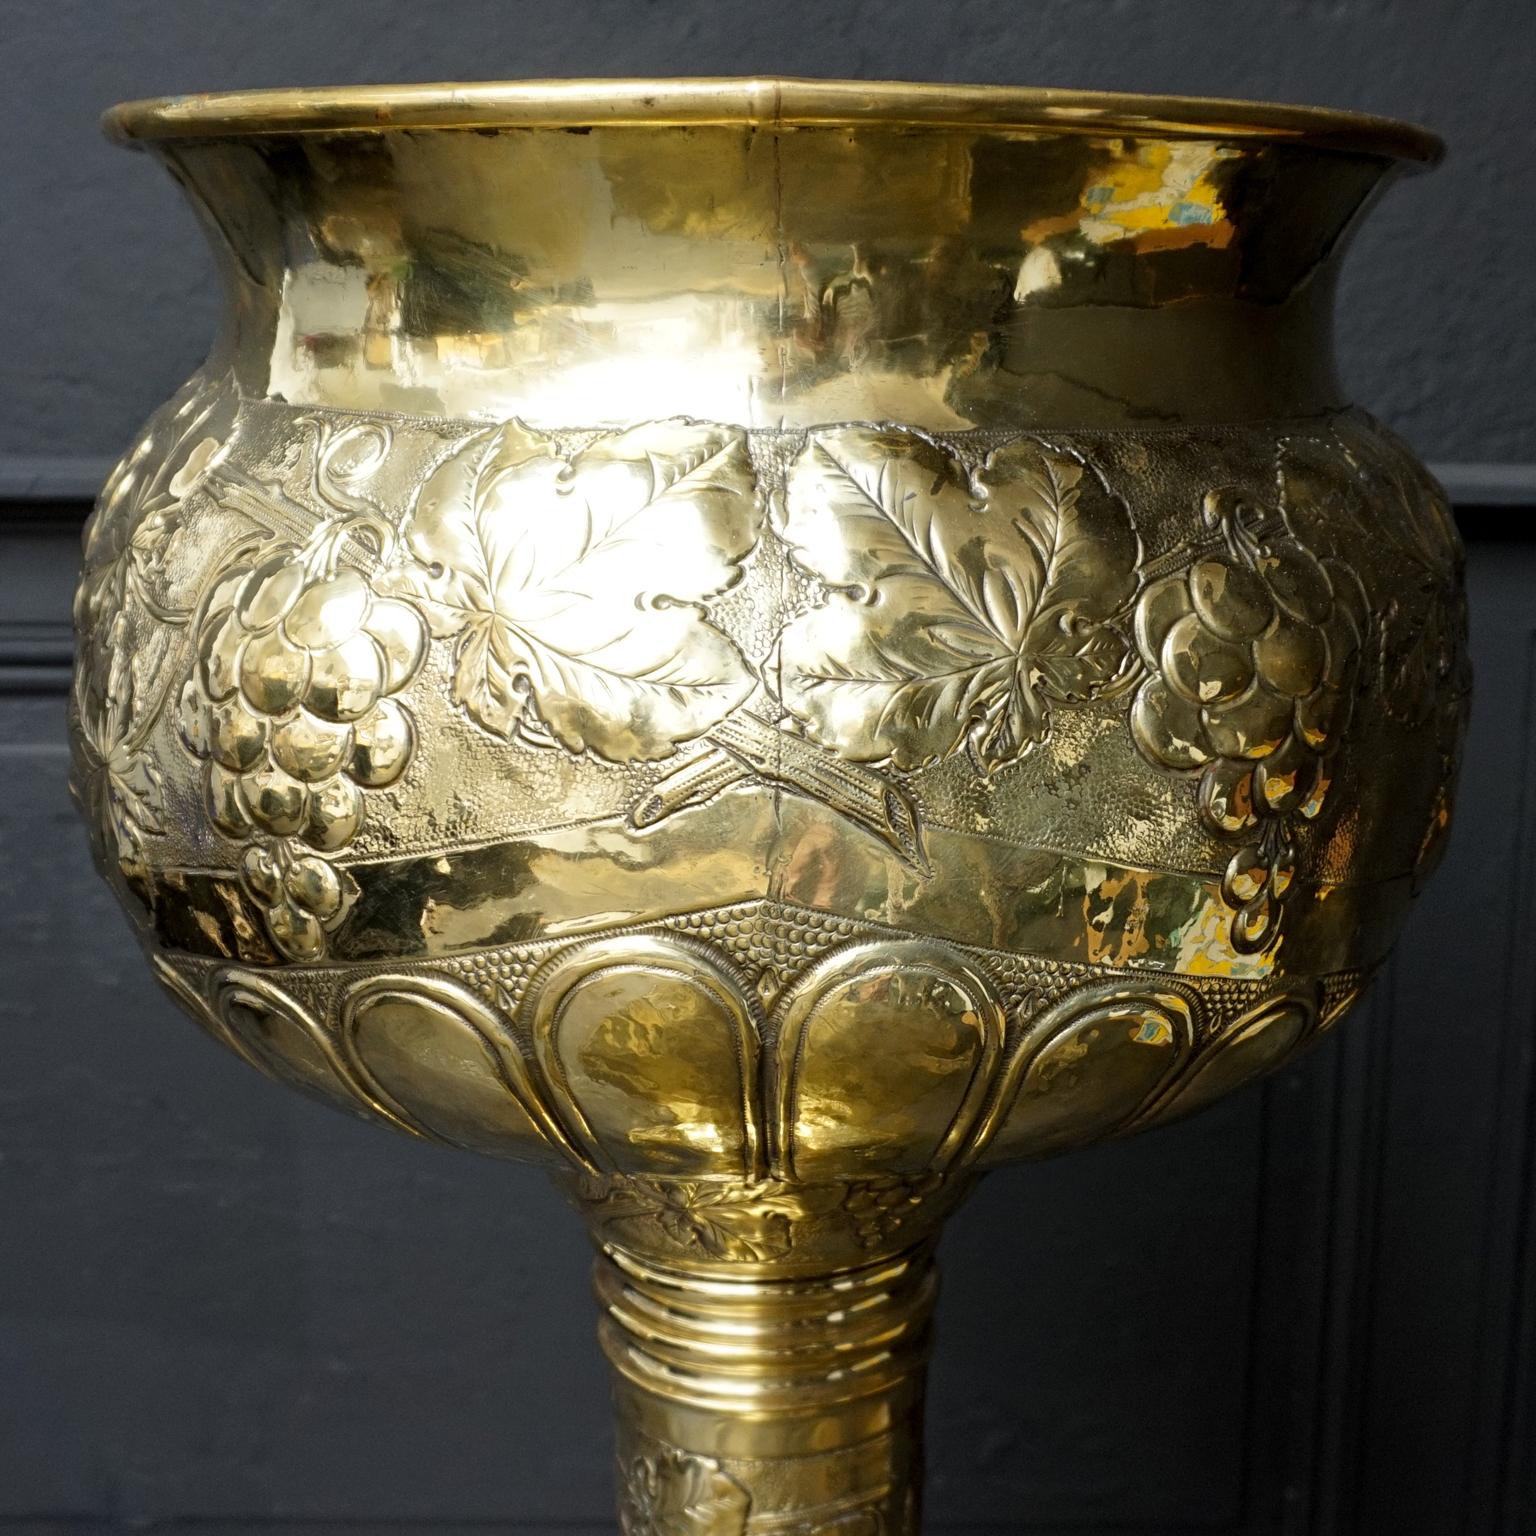 19th Century Large Dutch Embossed Brass Cachepot Jardinière or Champagne Cooler For Sale 2